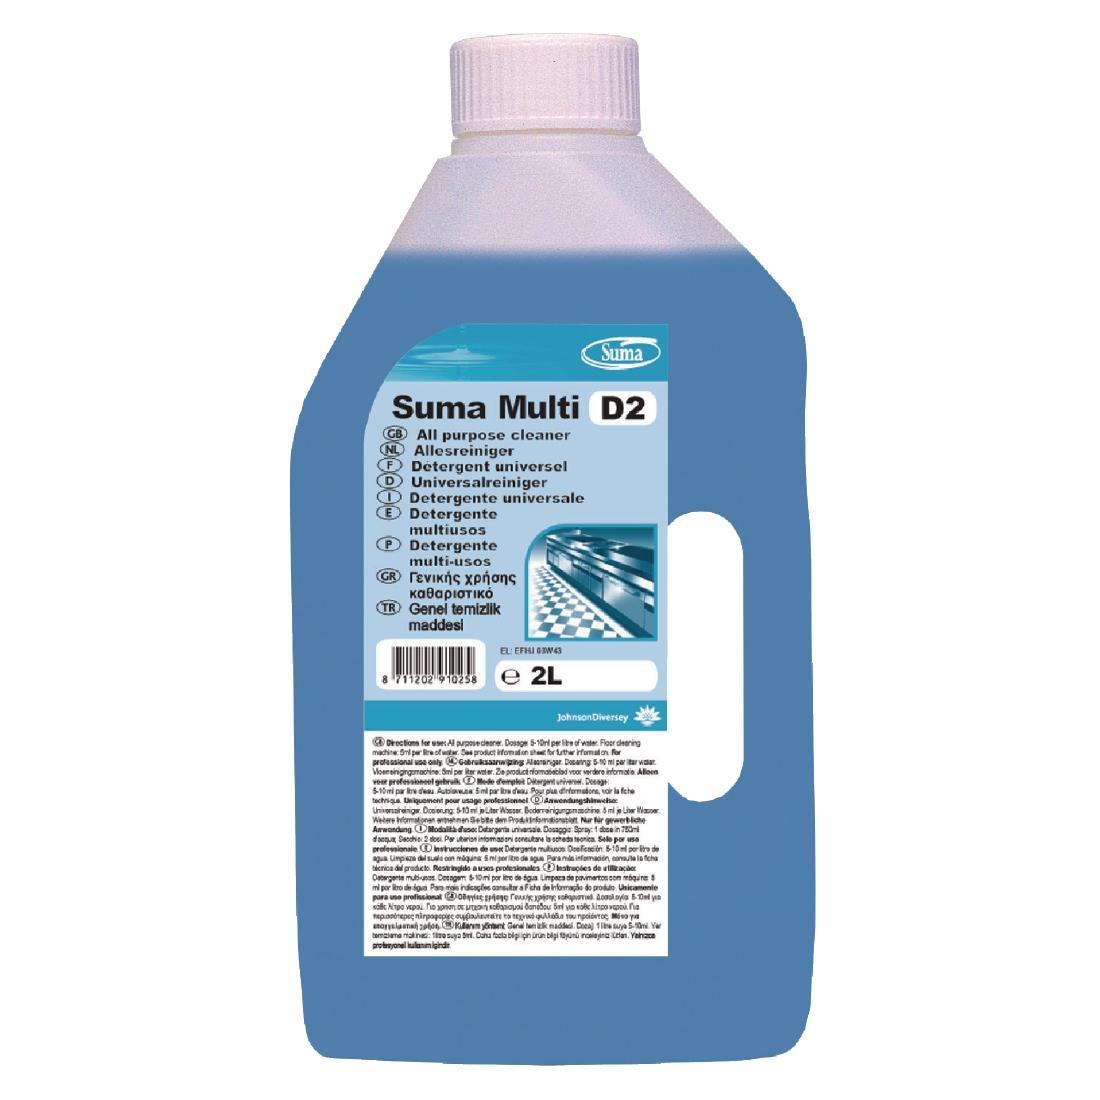 Suma Multi D2 All-Purpose Cleaner Concentrate 2Ltr (6 Pack) - CD512  - 1